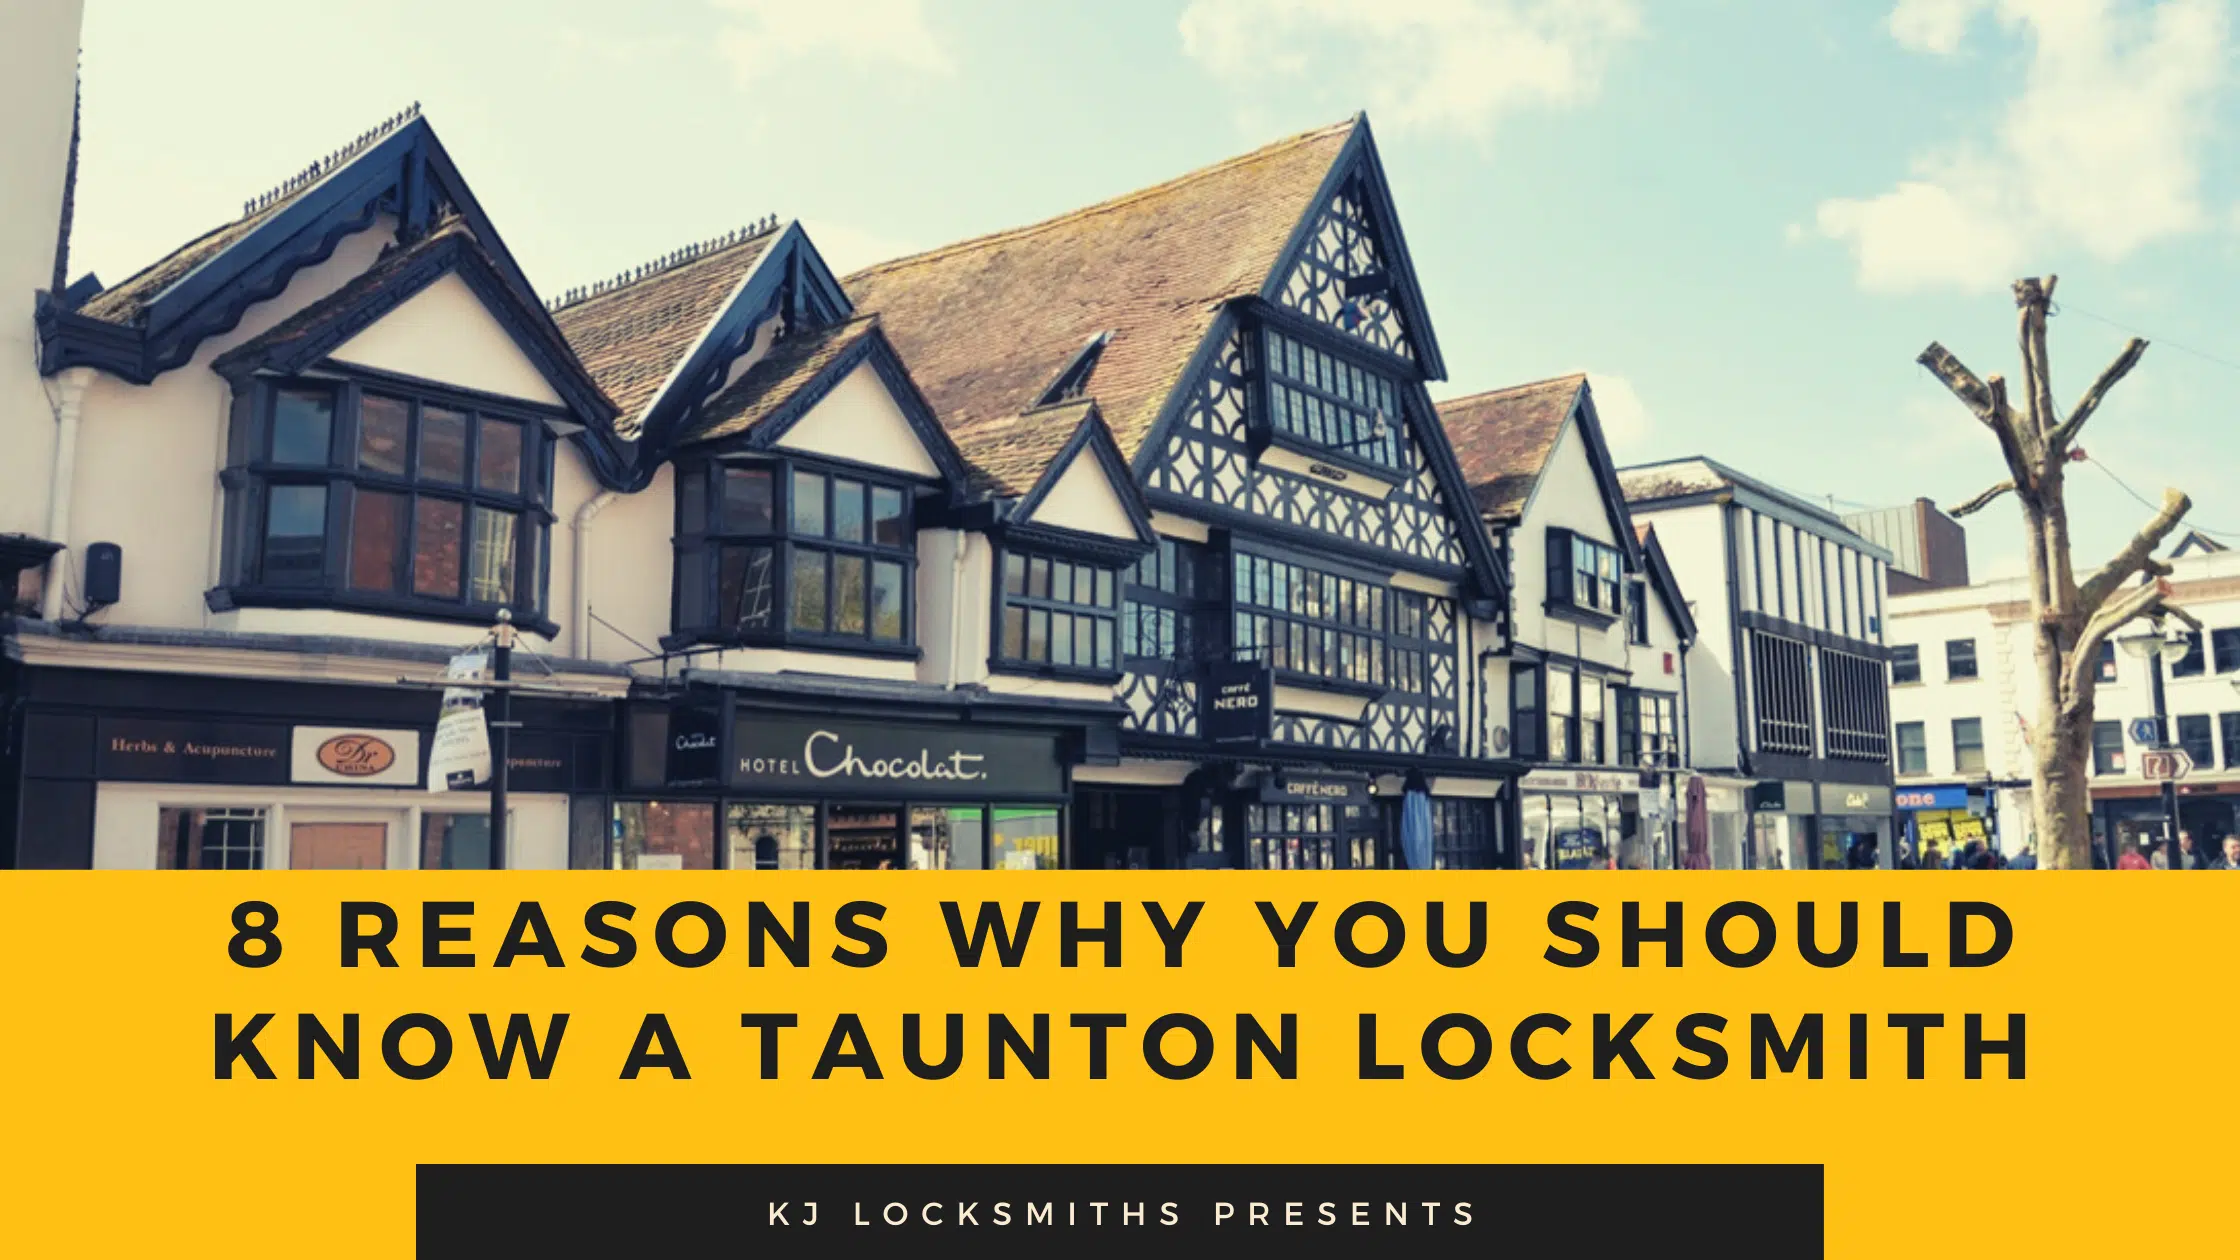 8 Reasons Why You Should Know A Taunton Locksmith